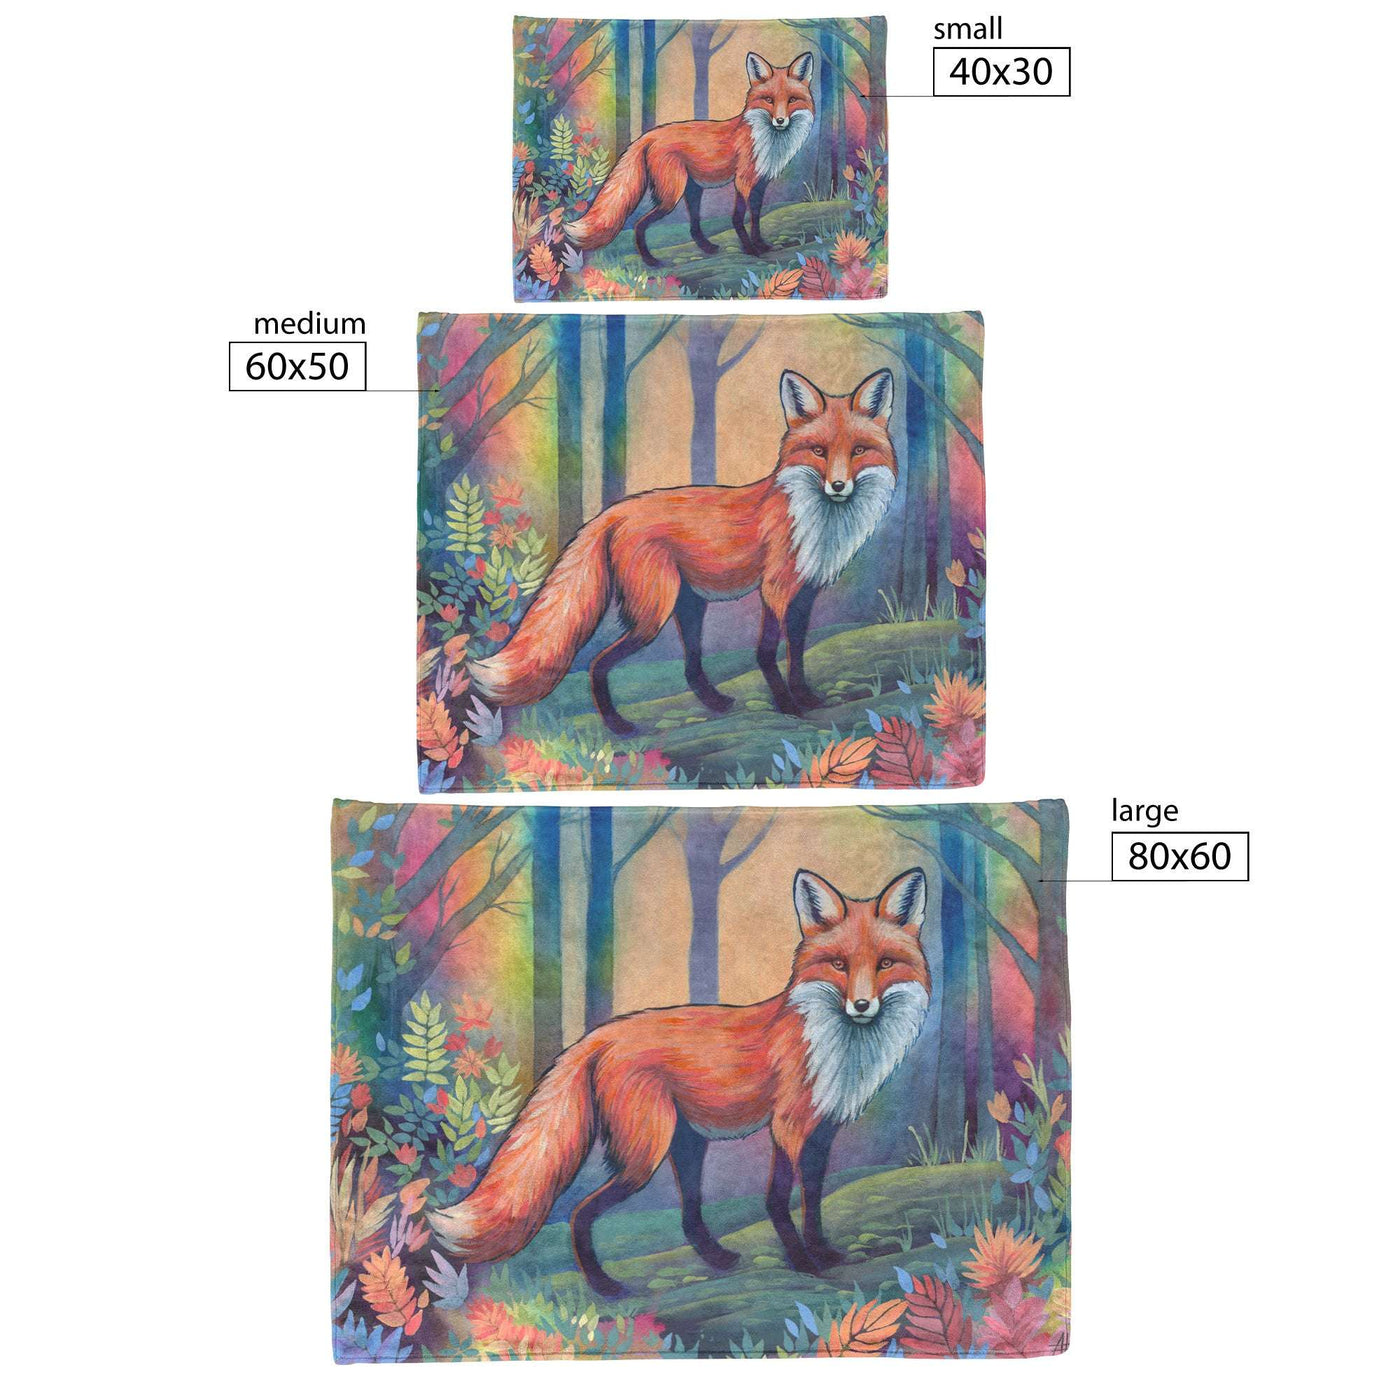 Three images of a Fox Blanket showing a fox in a forest, each increasing in size from small to large, with different dimensions labeled.